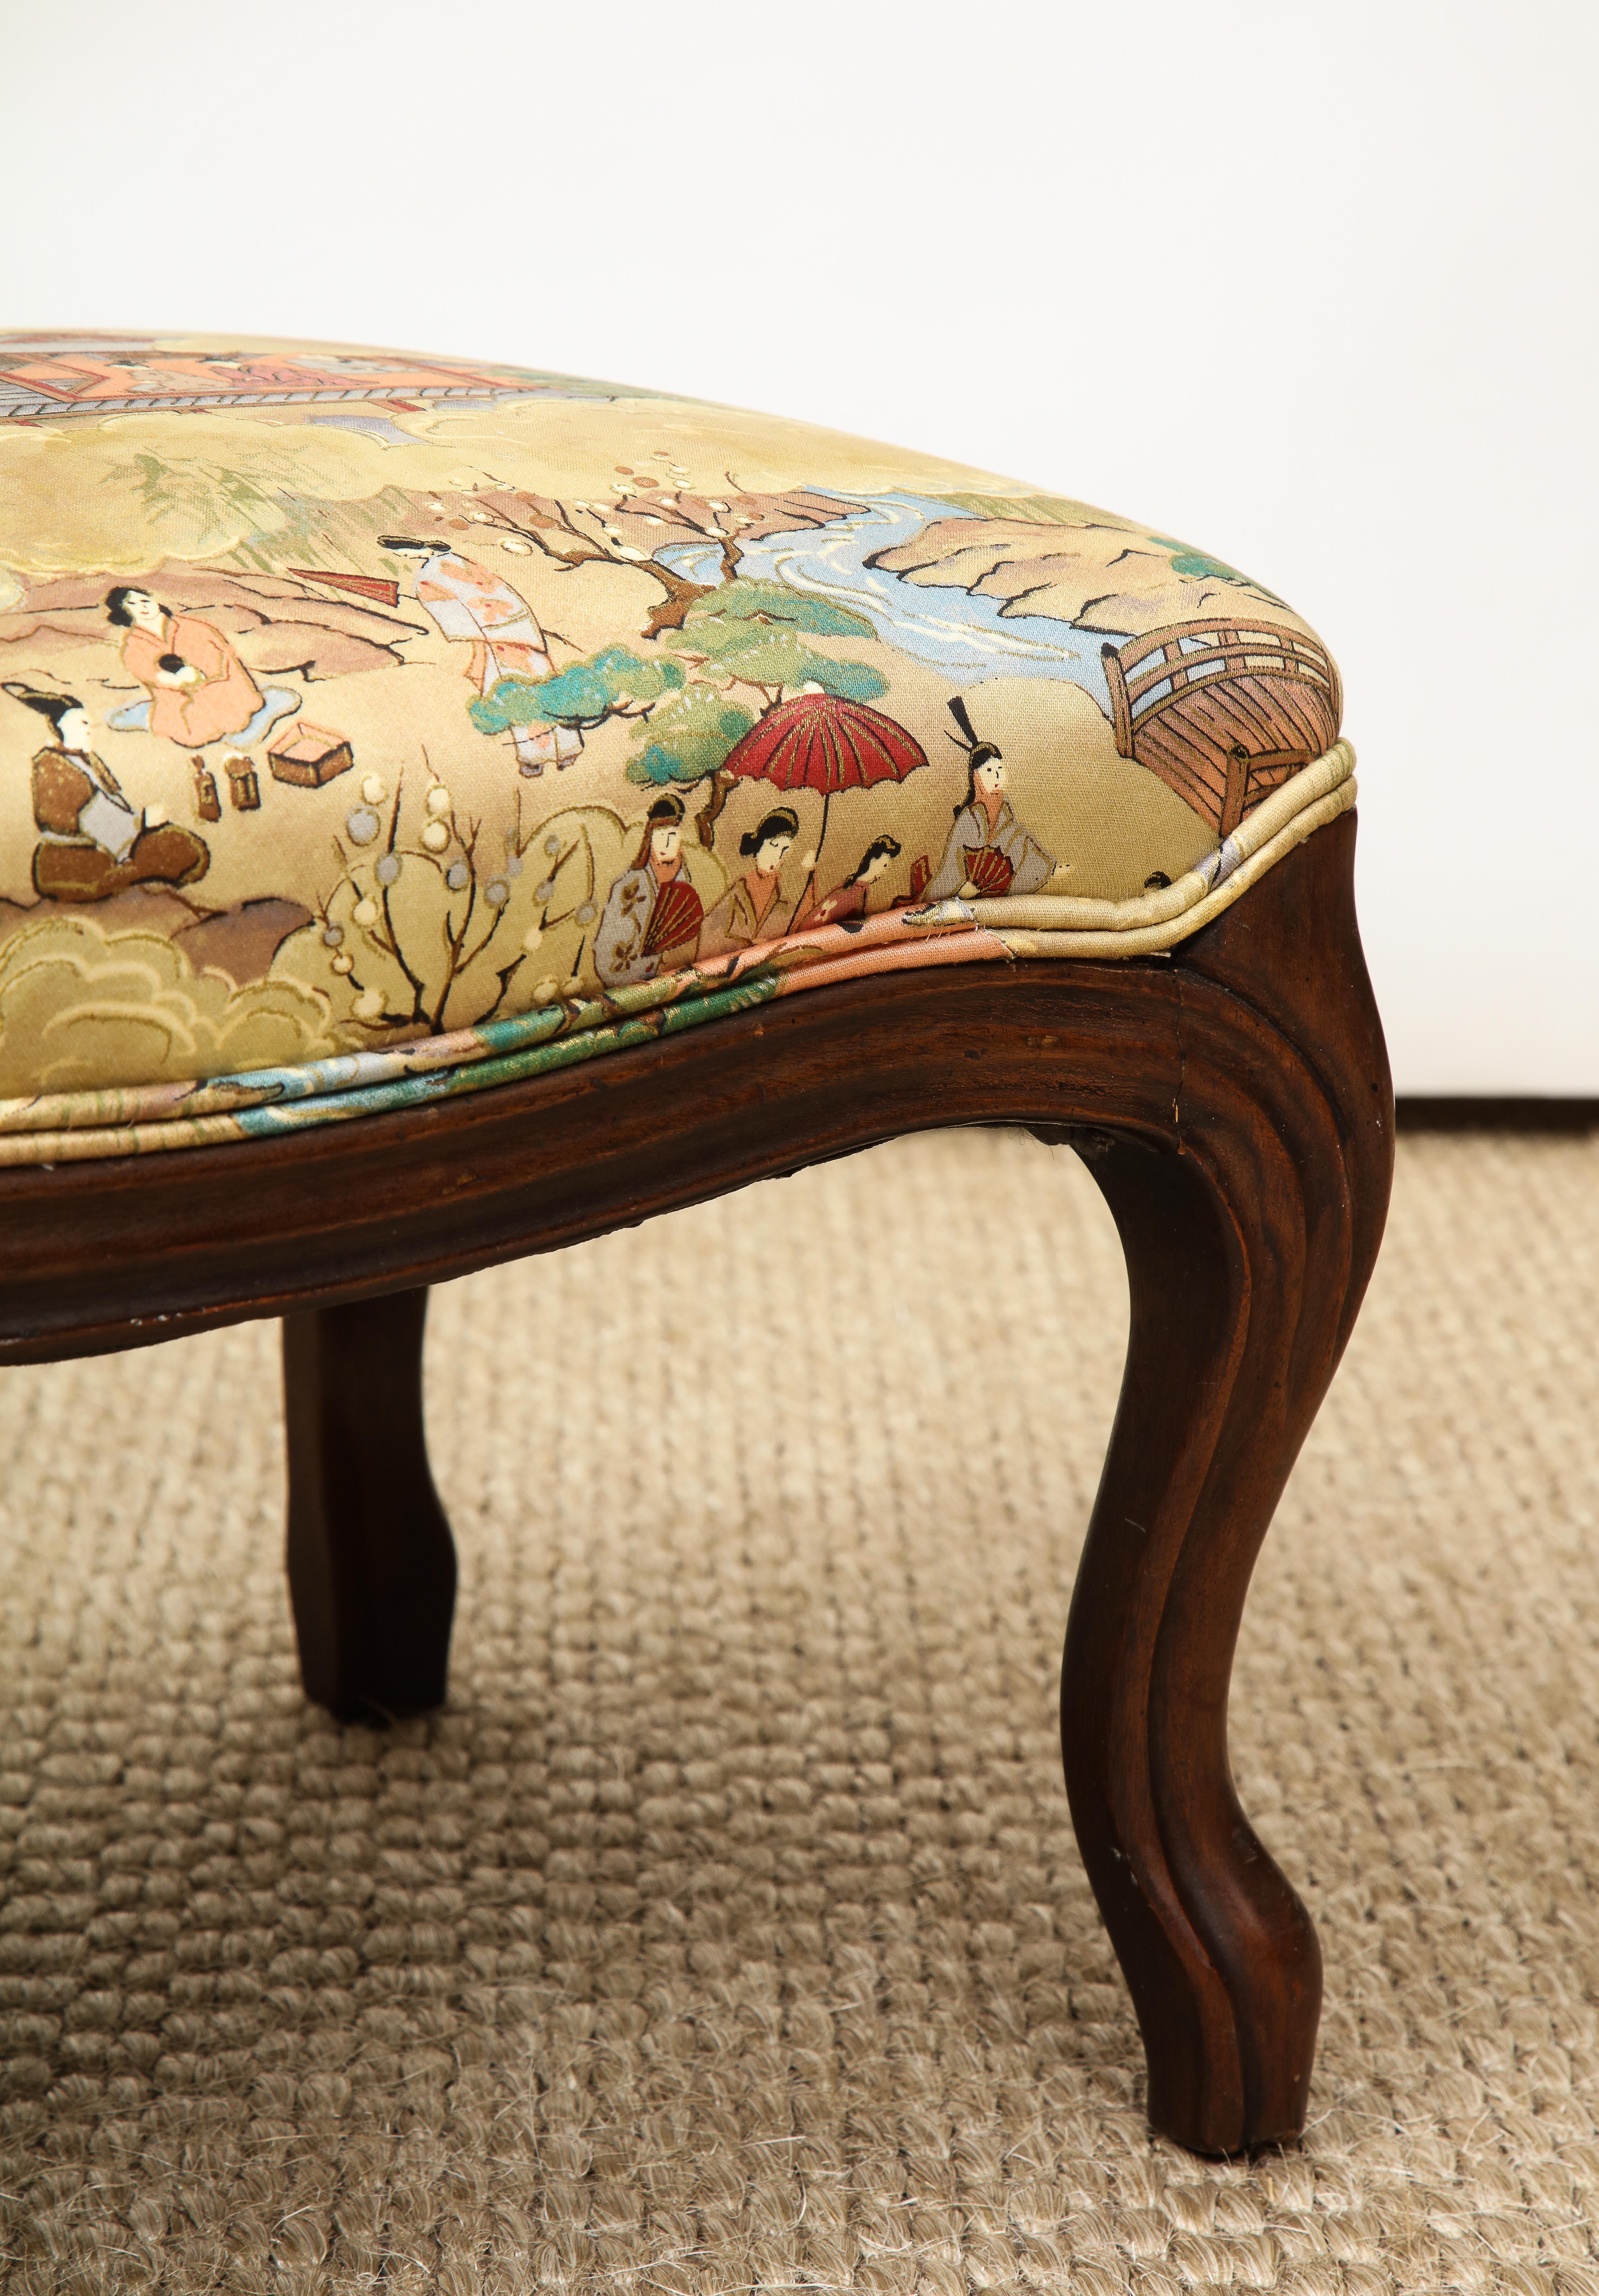 This Louis XV style footstool has cabriole legs and is upholstered in a chinoiserie motif silk. A perfect layering piece and a stylish place to perch your feet or some books!